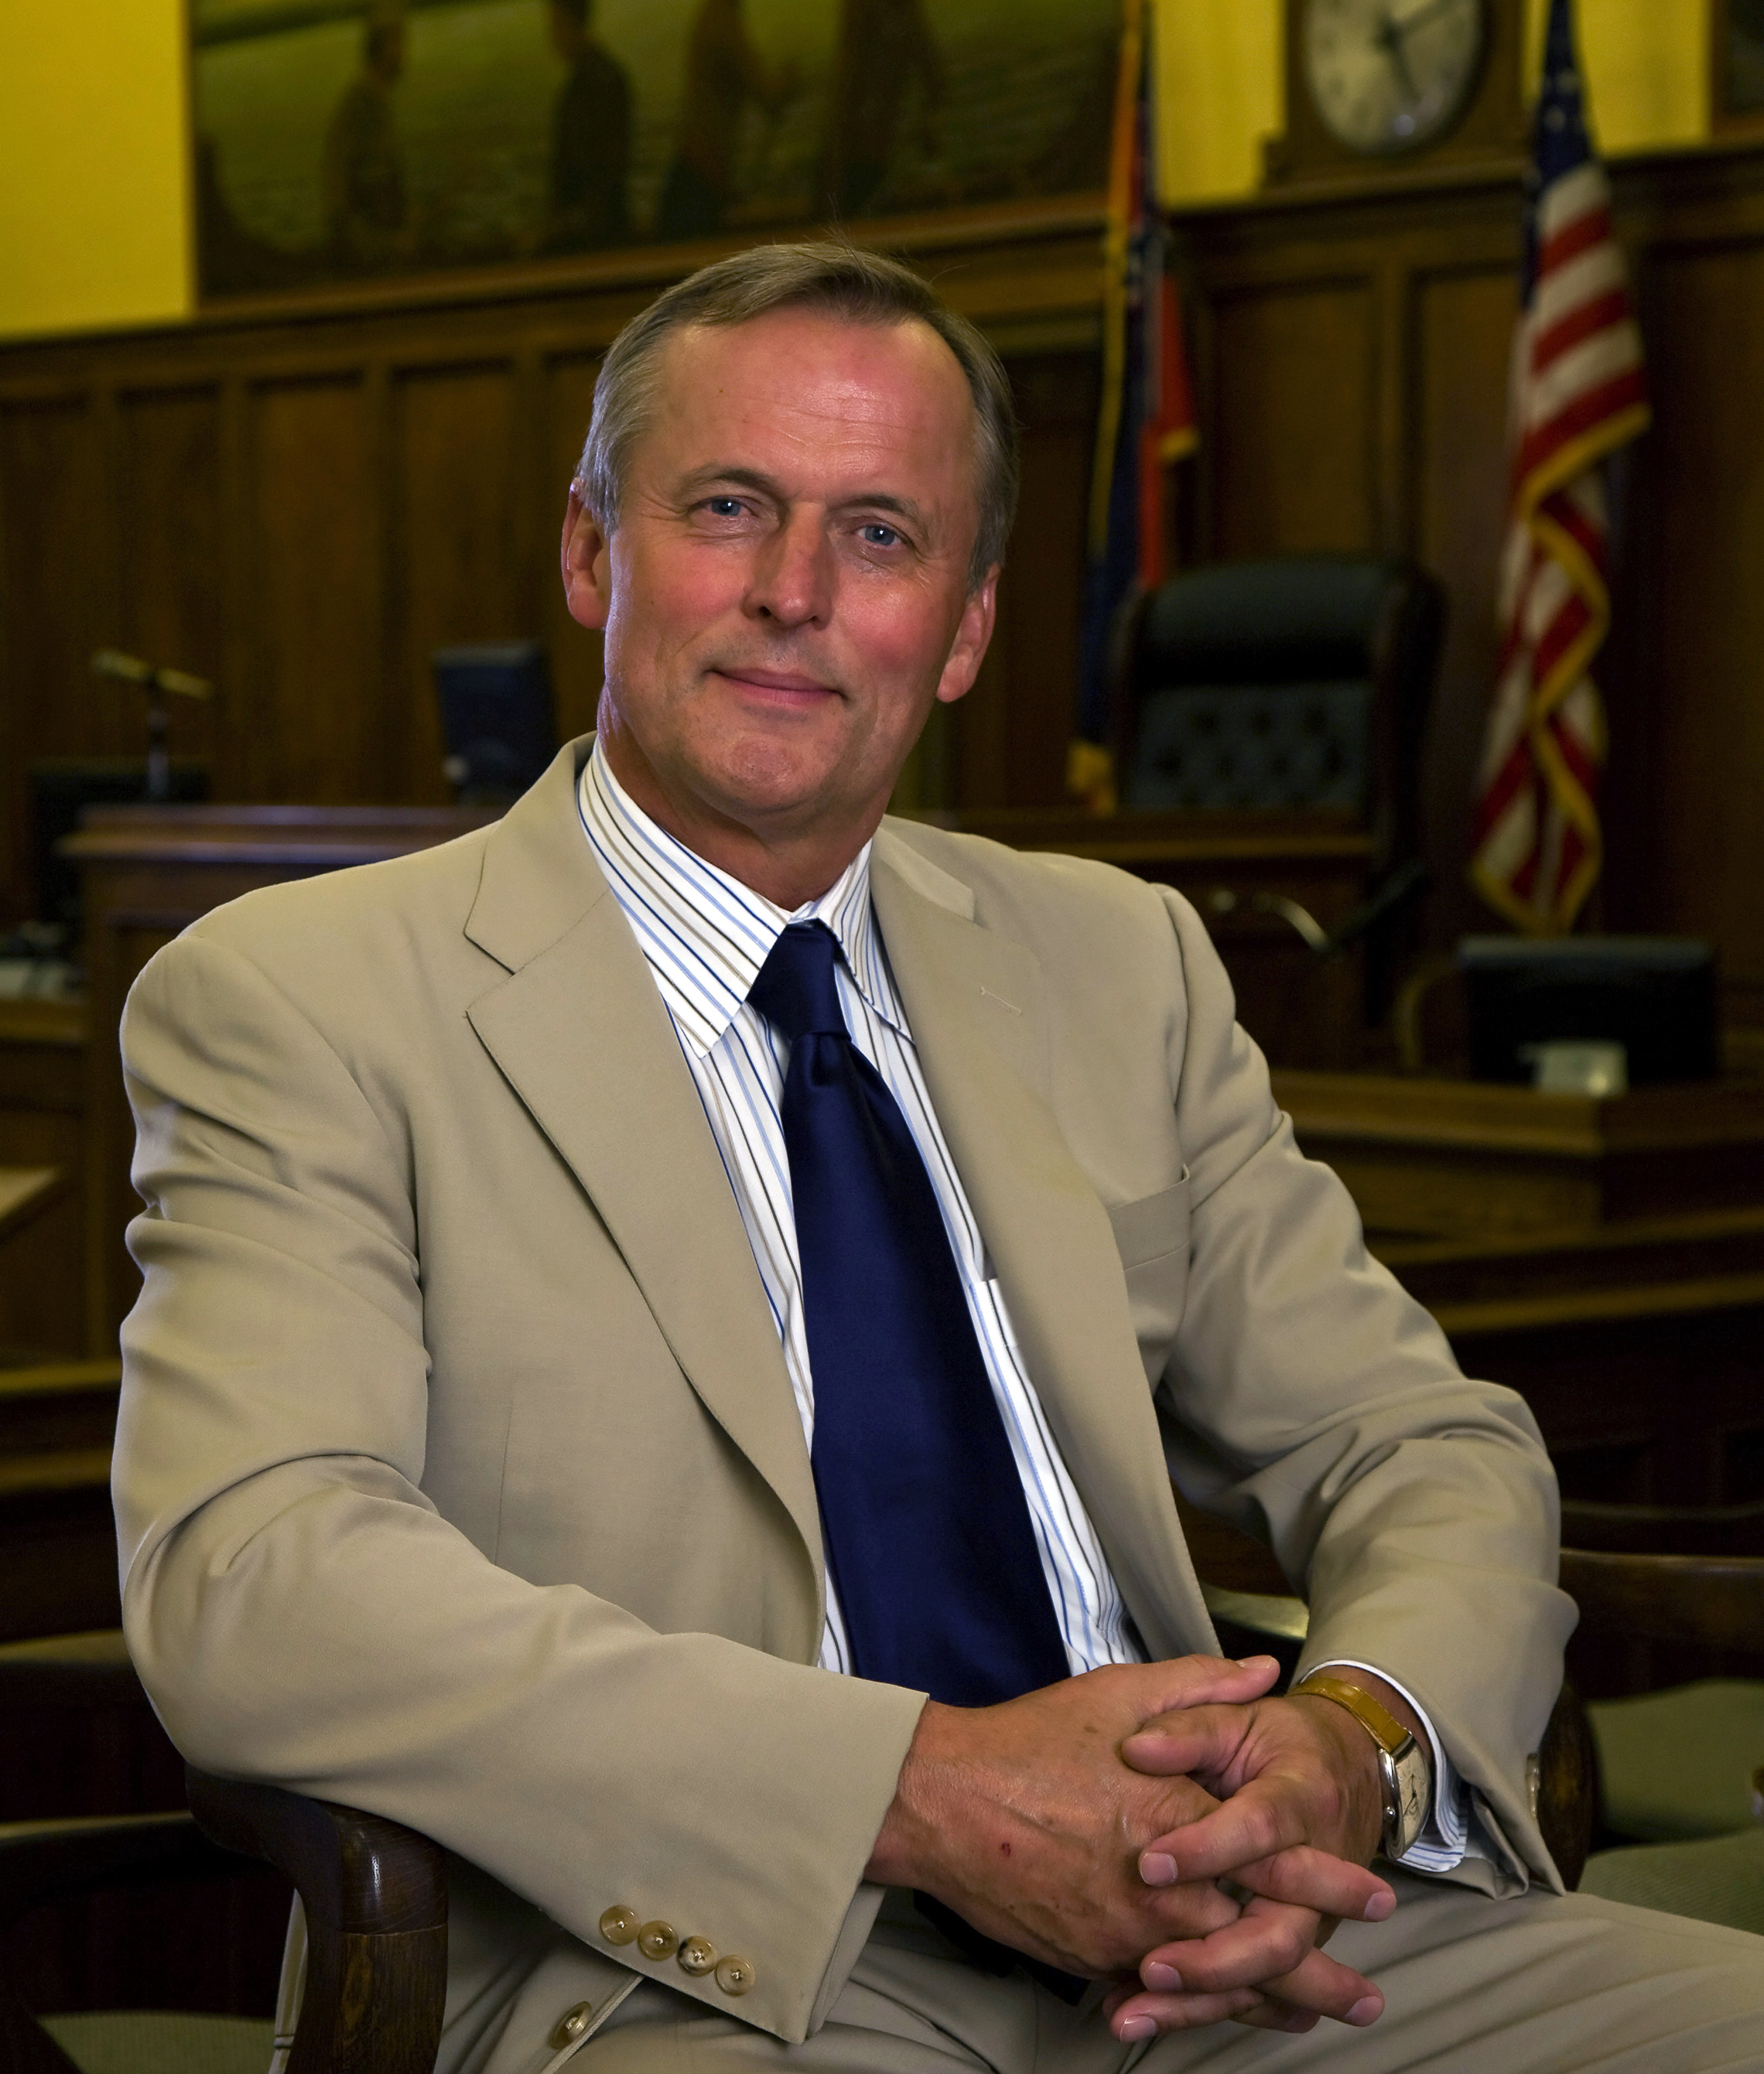 2009: John Grisham, 20 years after he published his first novel, 